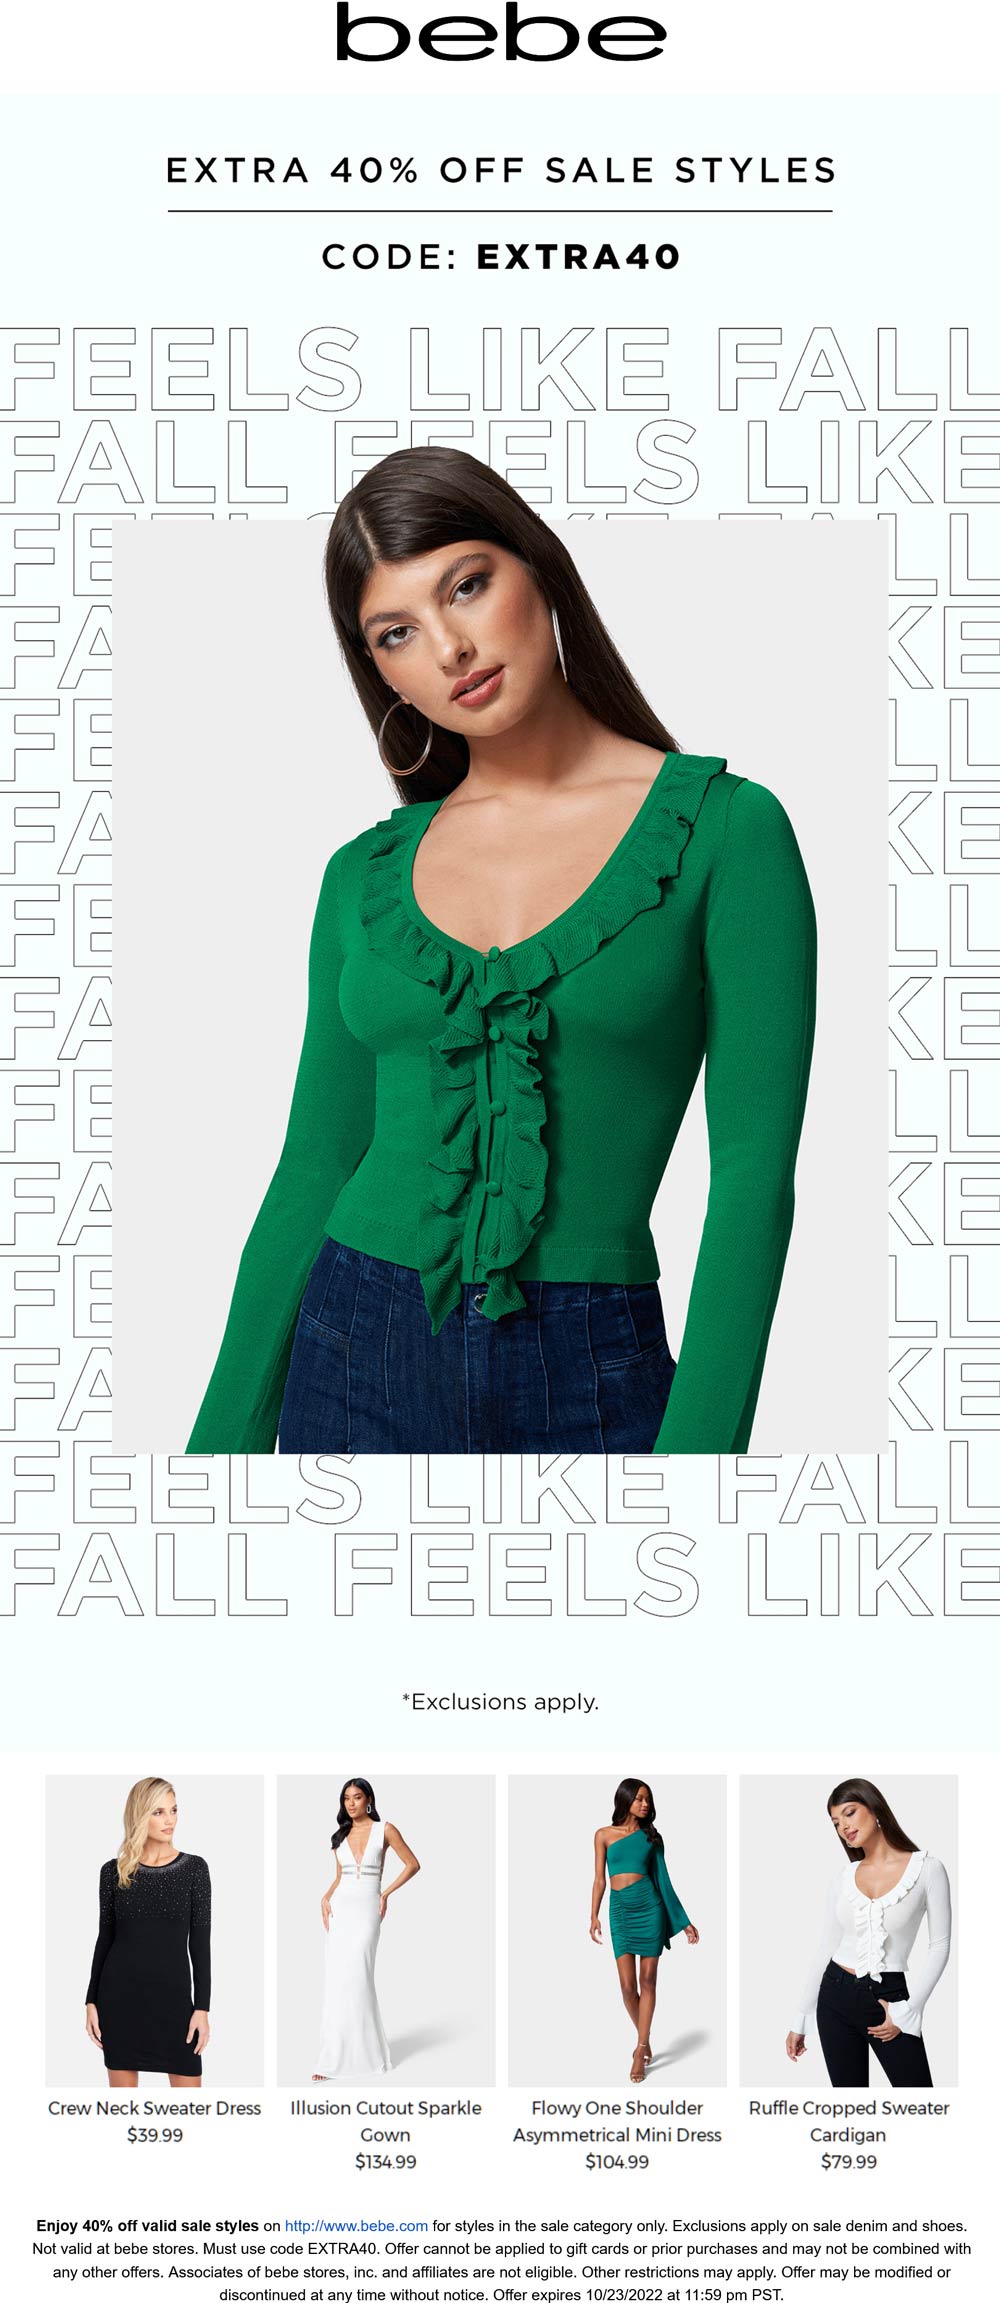 bebe stores Coupon  Extra 40% off sale styles today at bebe via promo code EXTRA40 #bebe 